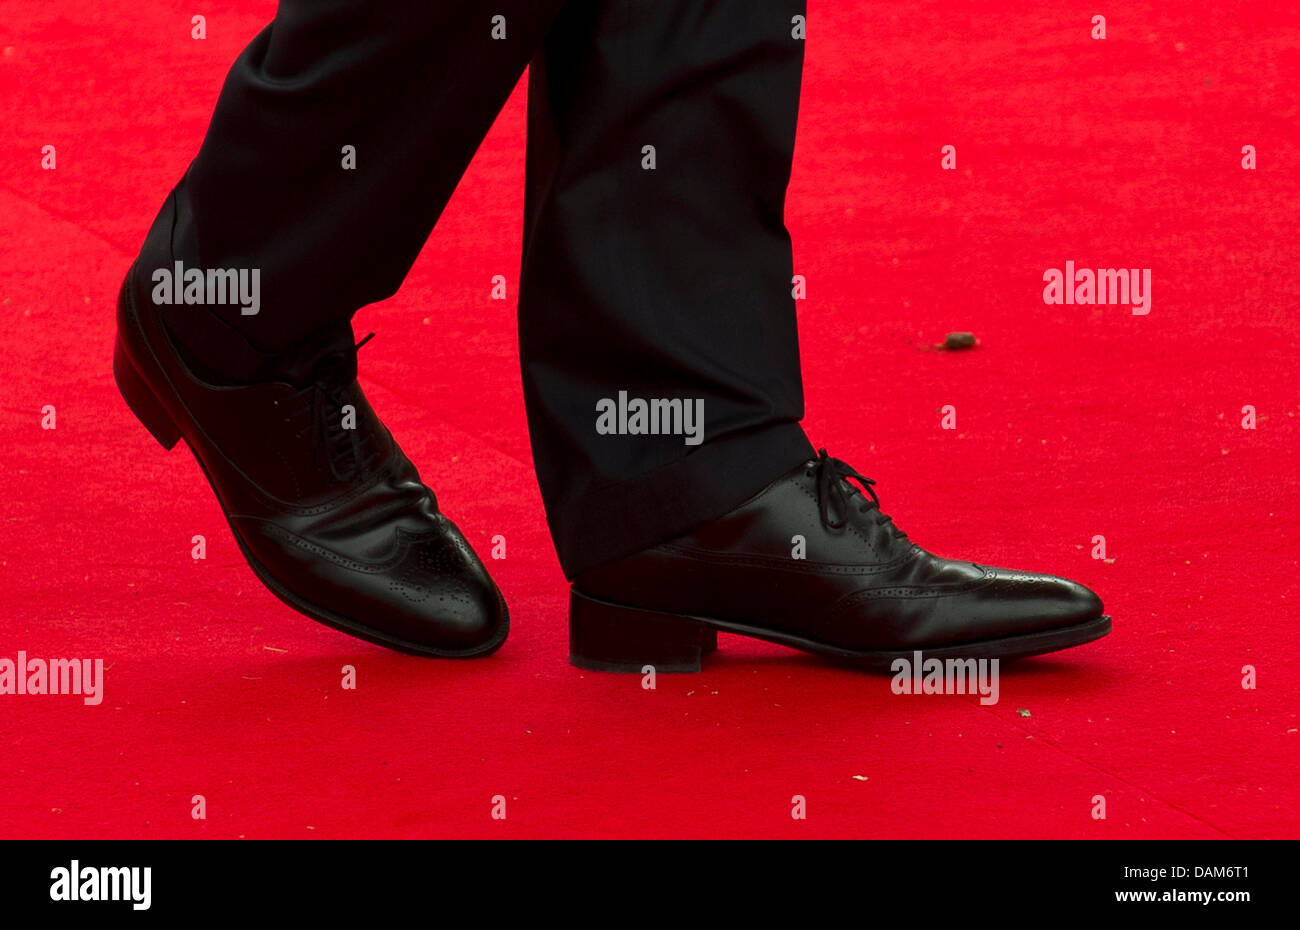 Wearing shoes with especially high heels, French President Nicolas Sarkozy  waits for guests during the G8 Summit in Deauville, France, 26 May 2011.  This year's G8 Summit is taking place in the